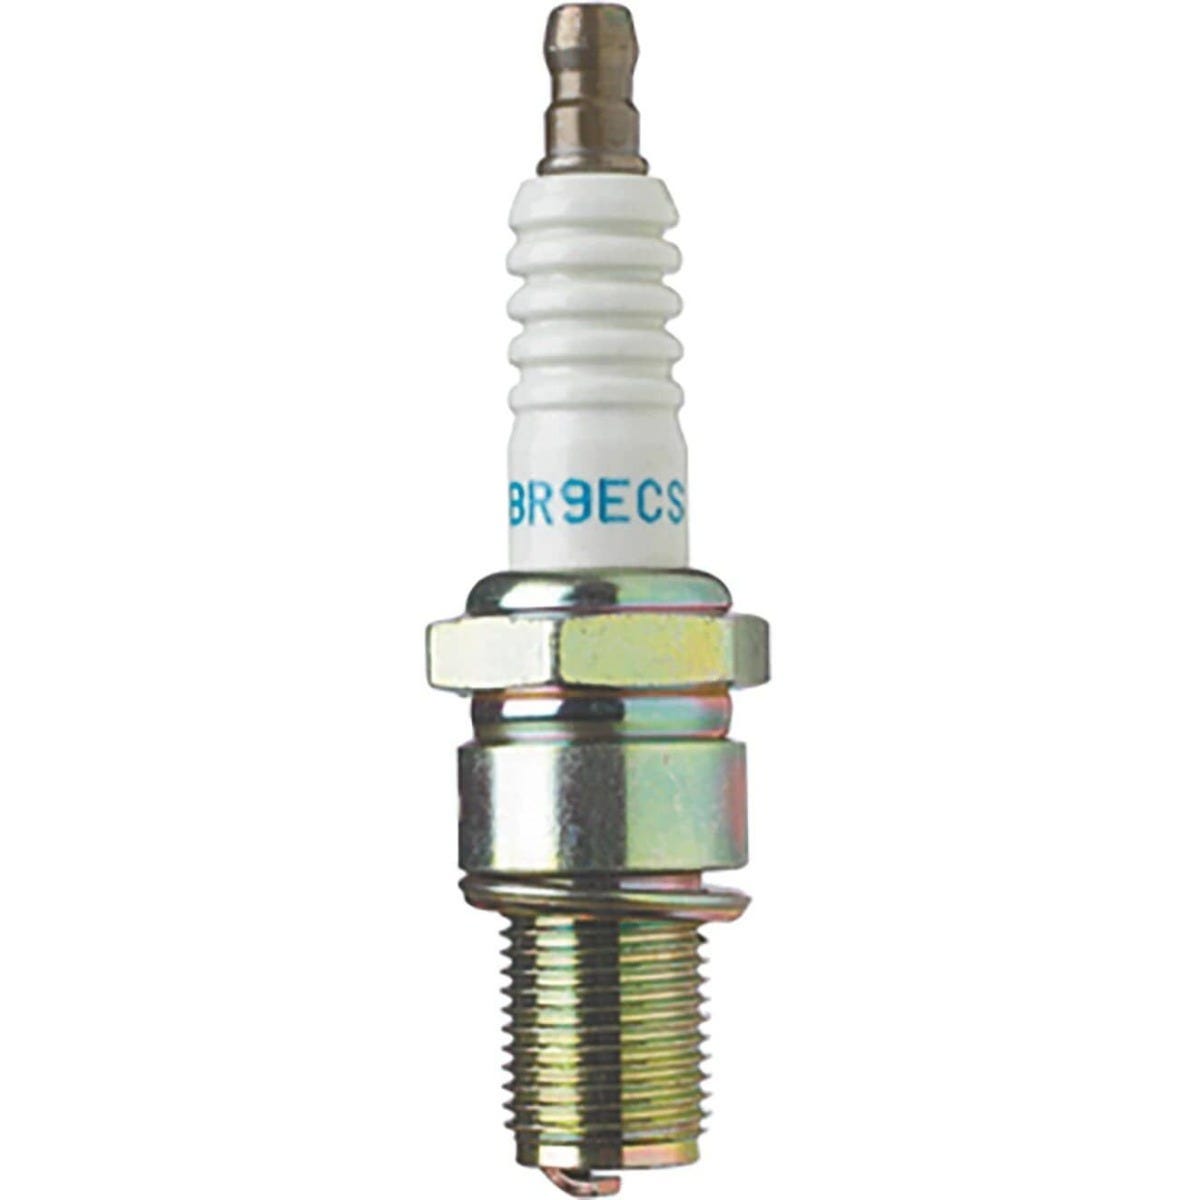 NGK Spark Plugs - 296000421 - The Parts Lodge